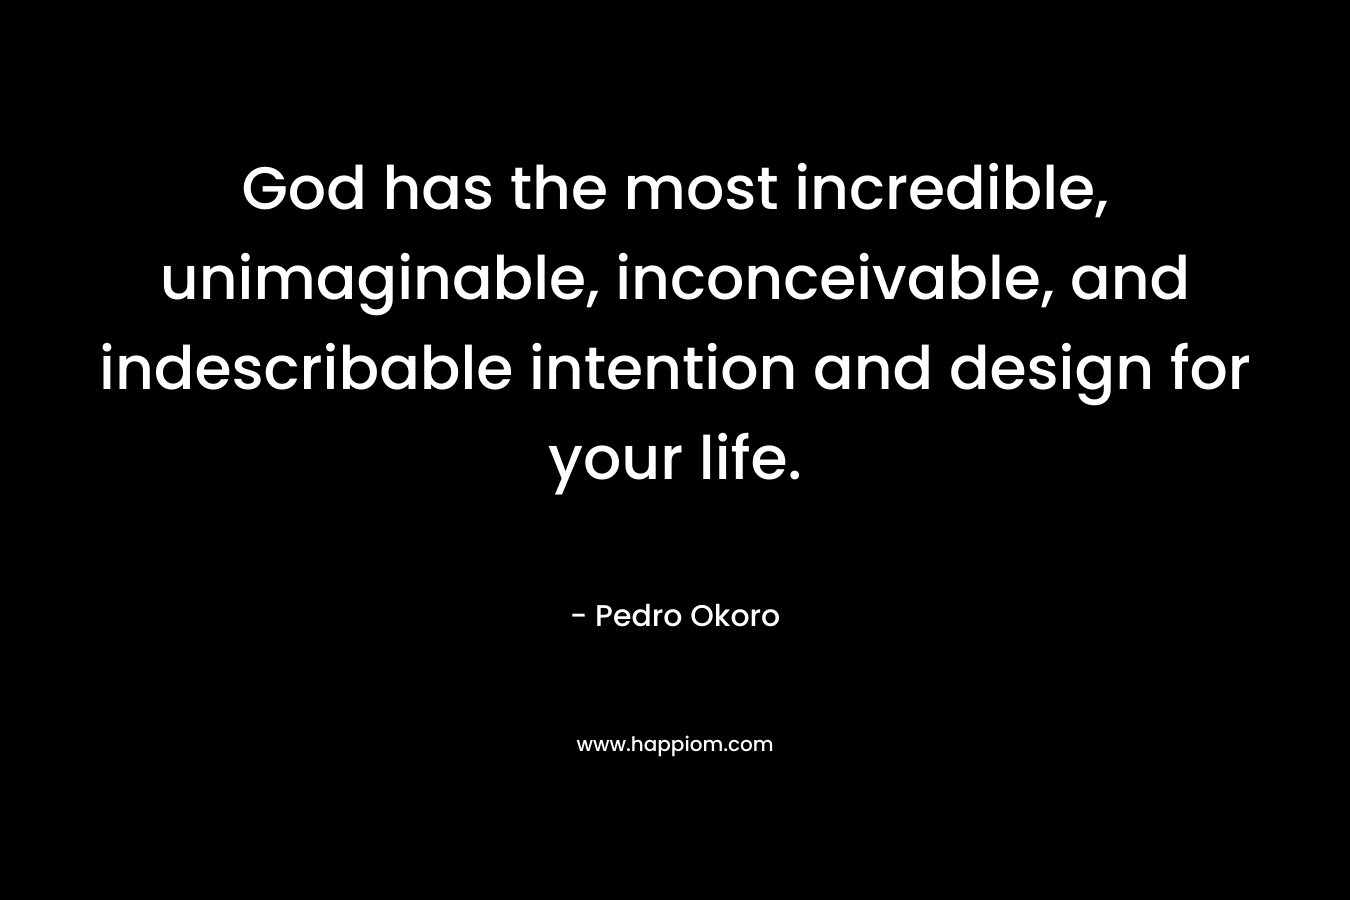 God has the most incredible, unimaginable, inconceivable, and indescribable intention and design for your life.